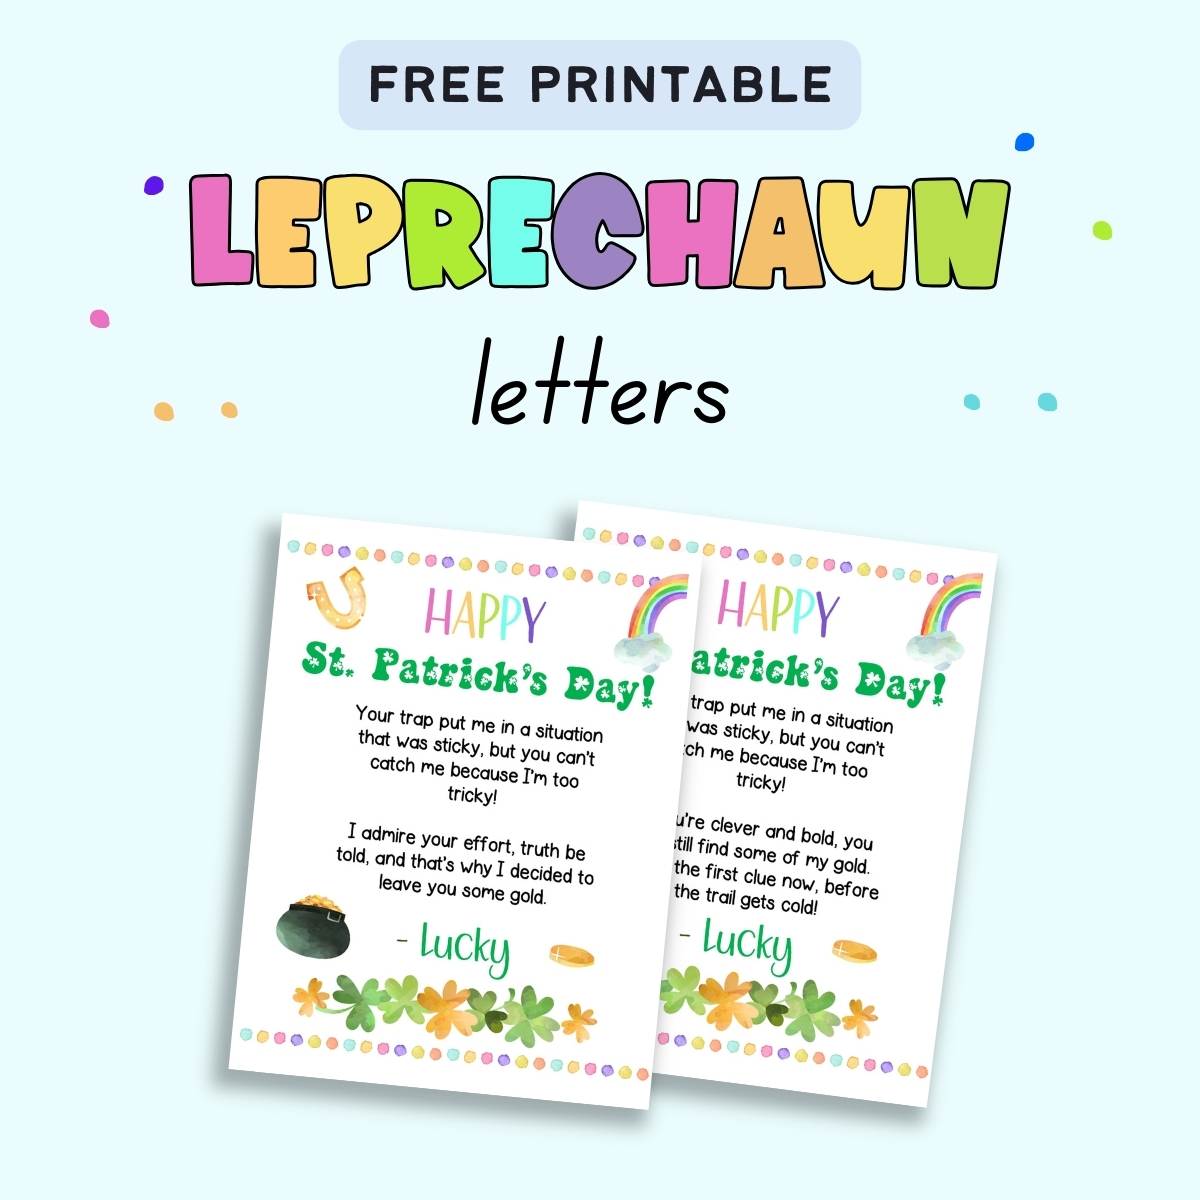 Text "free printable leprechaun letters" with a preview of two printable notes for a leprechaun trap